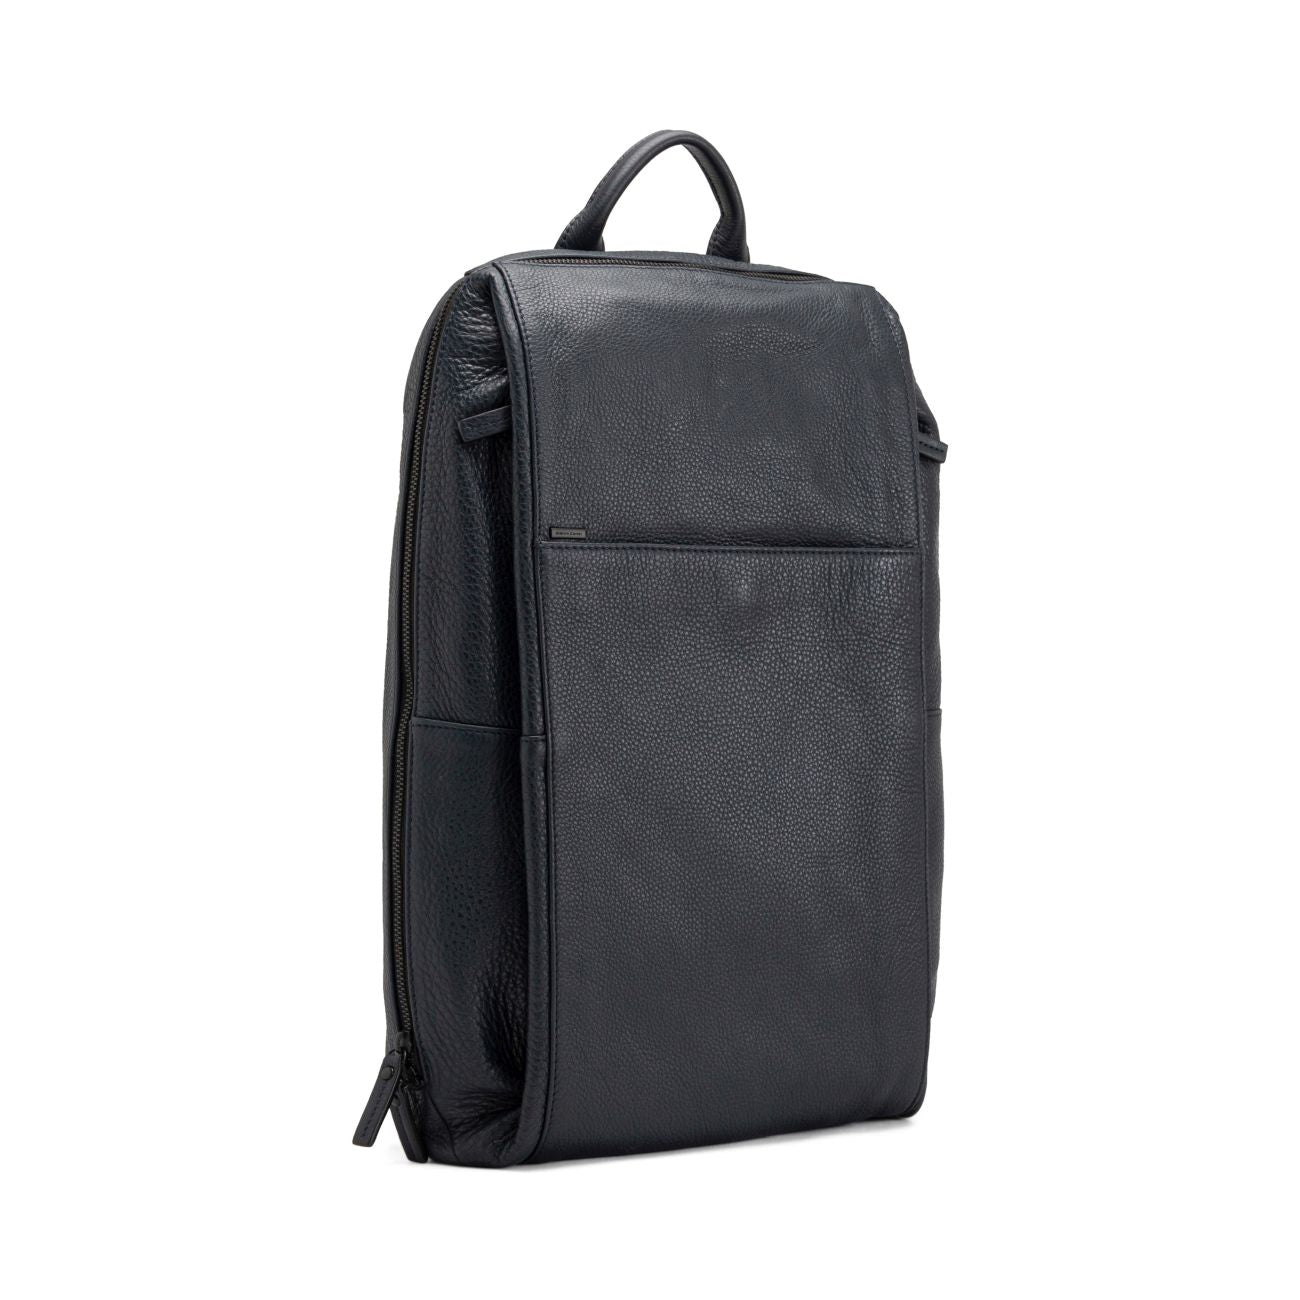 ARES Calfskin Backpack by Gianni Conti